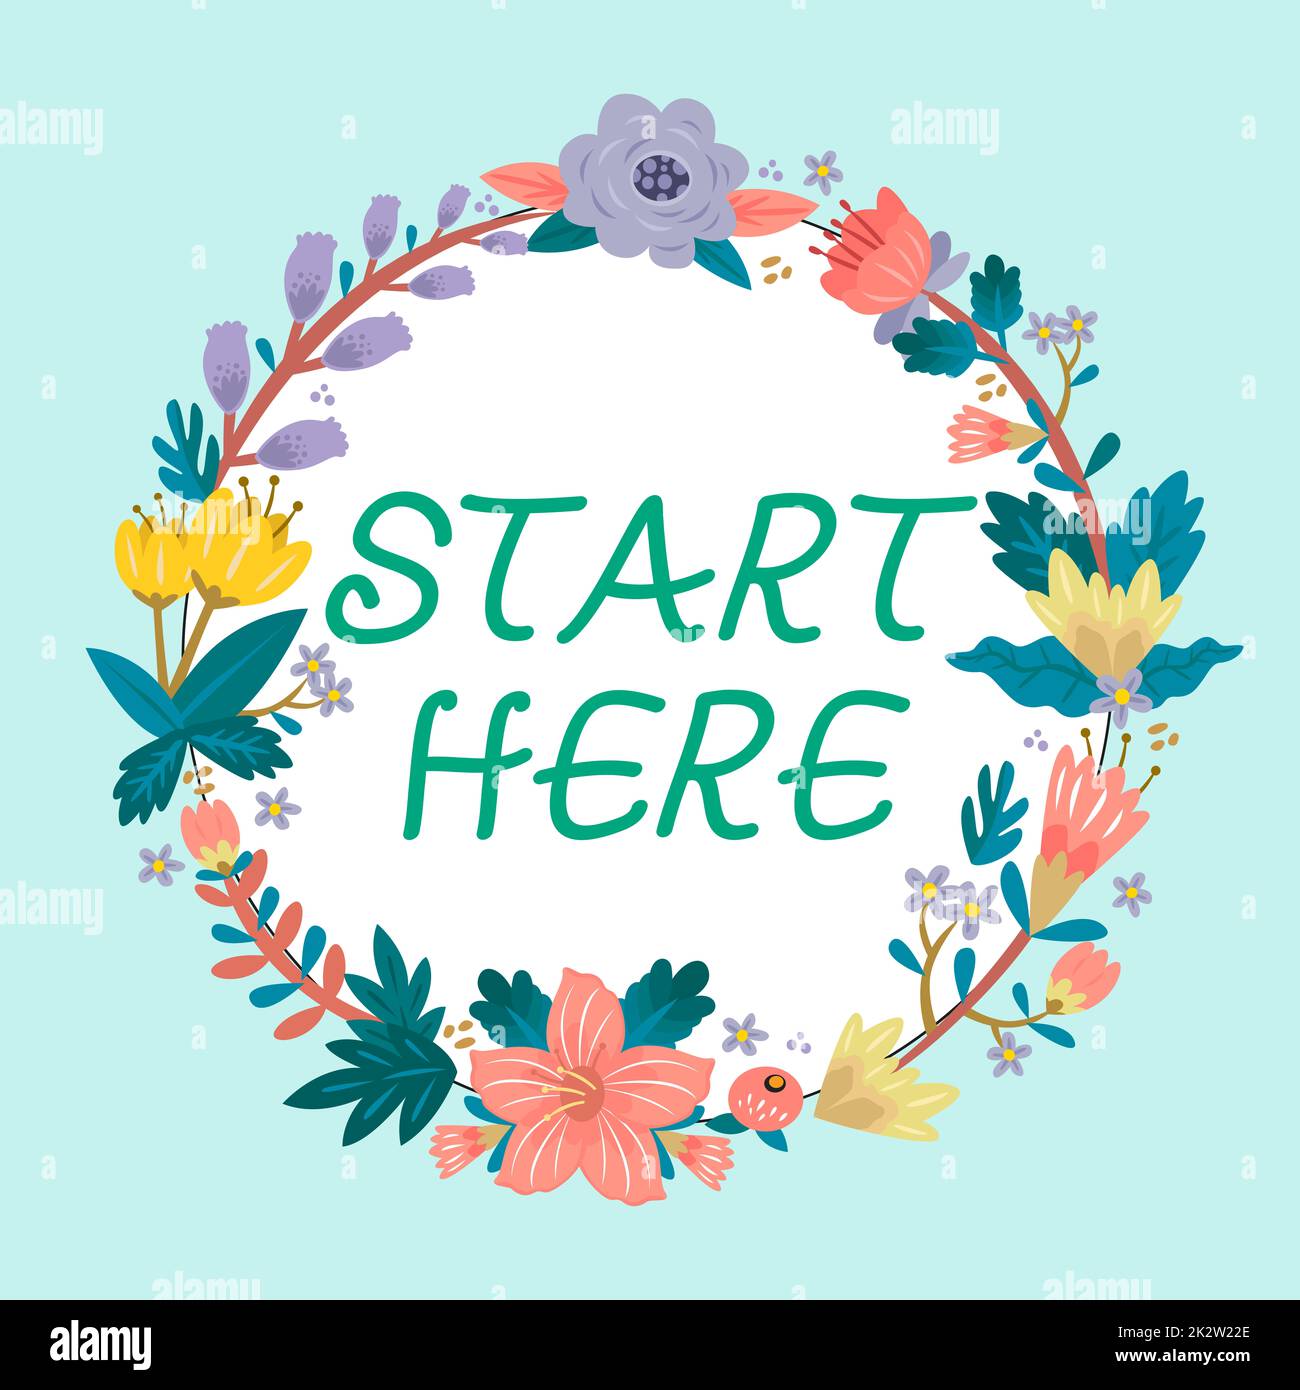 Text sign showing Start Here. Internet Concept telling someone this is beginning point to go from to destination Frame Decorated With Colorful Flowers And Foliage Arranged Harmoniously. Stock Photo